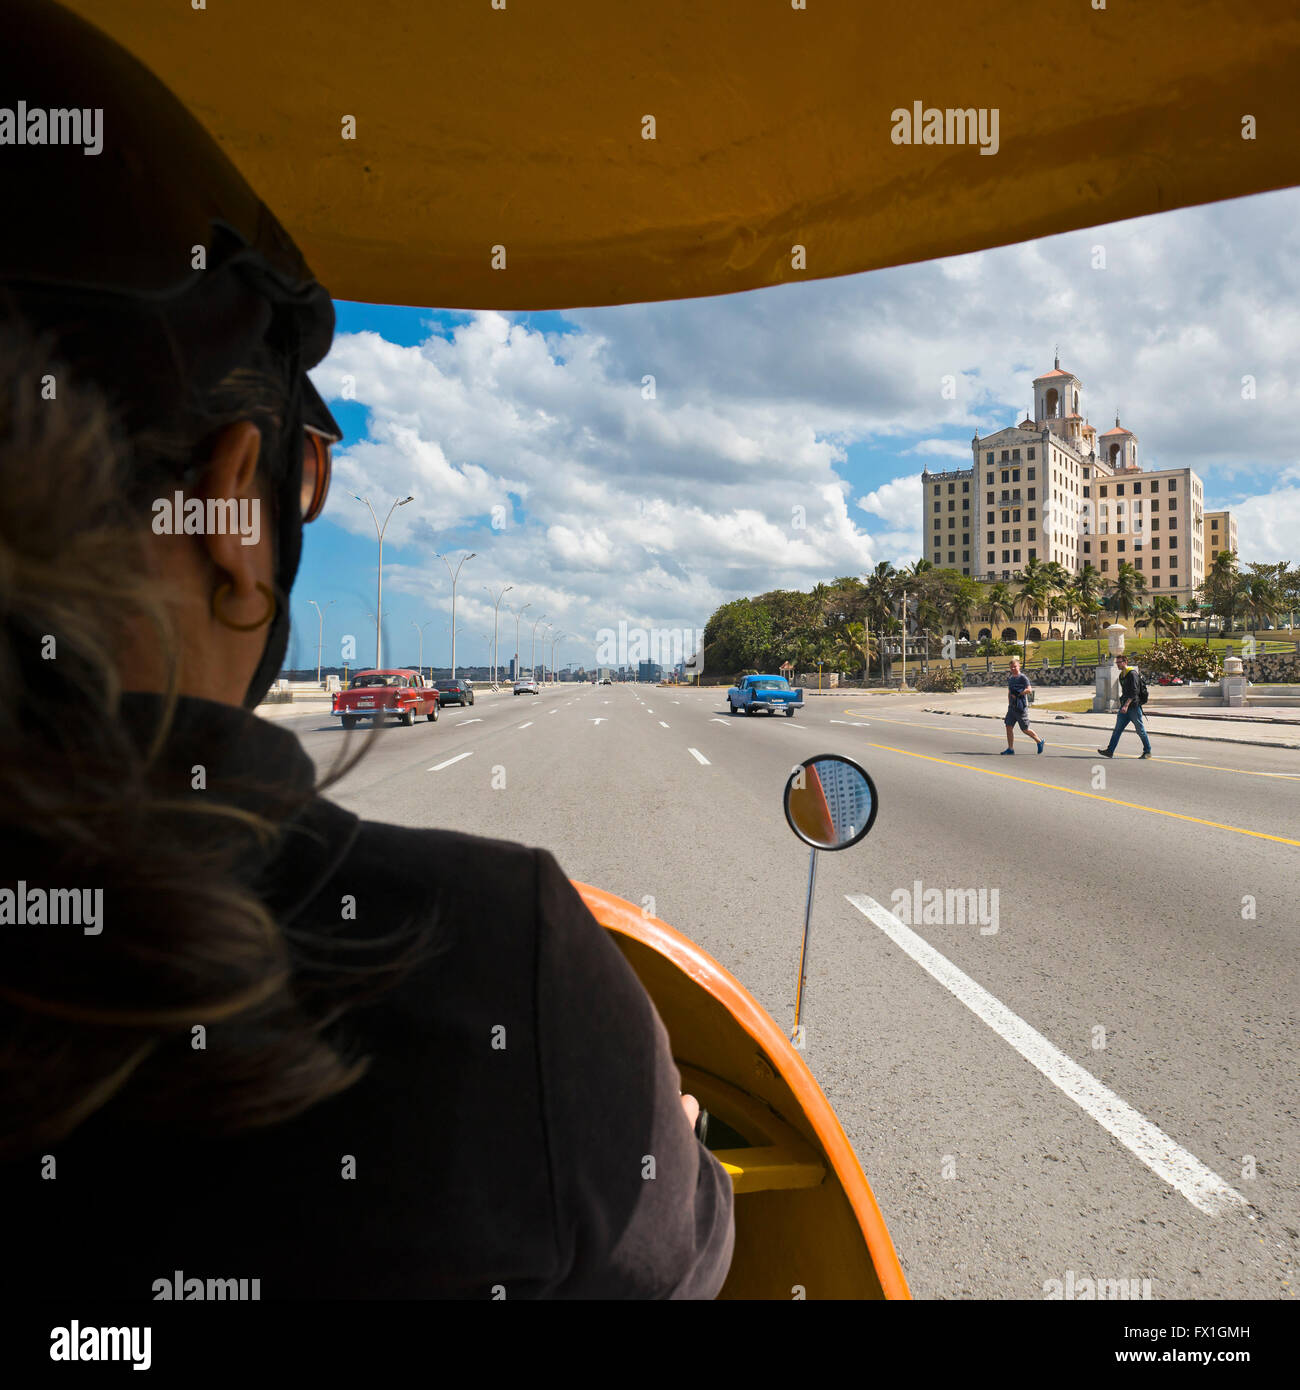 Square view of the Hotel National in Havana from a bright yellow coco taxi, Cuba. Stock Photo